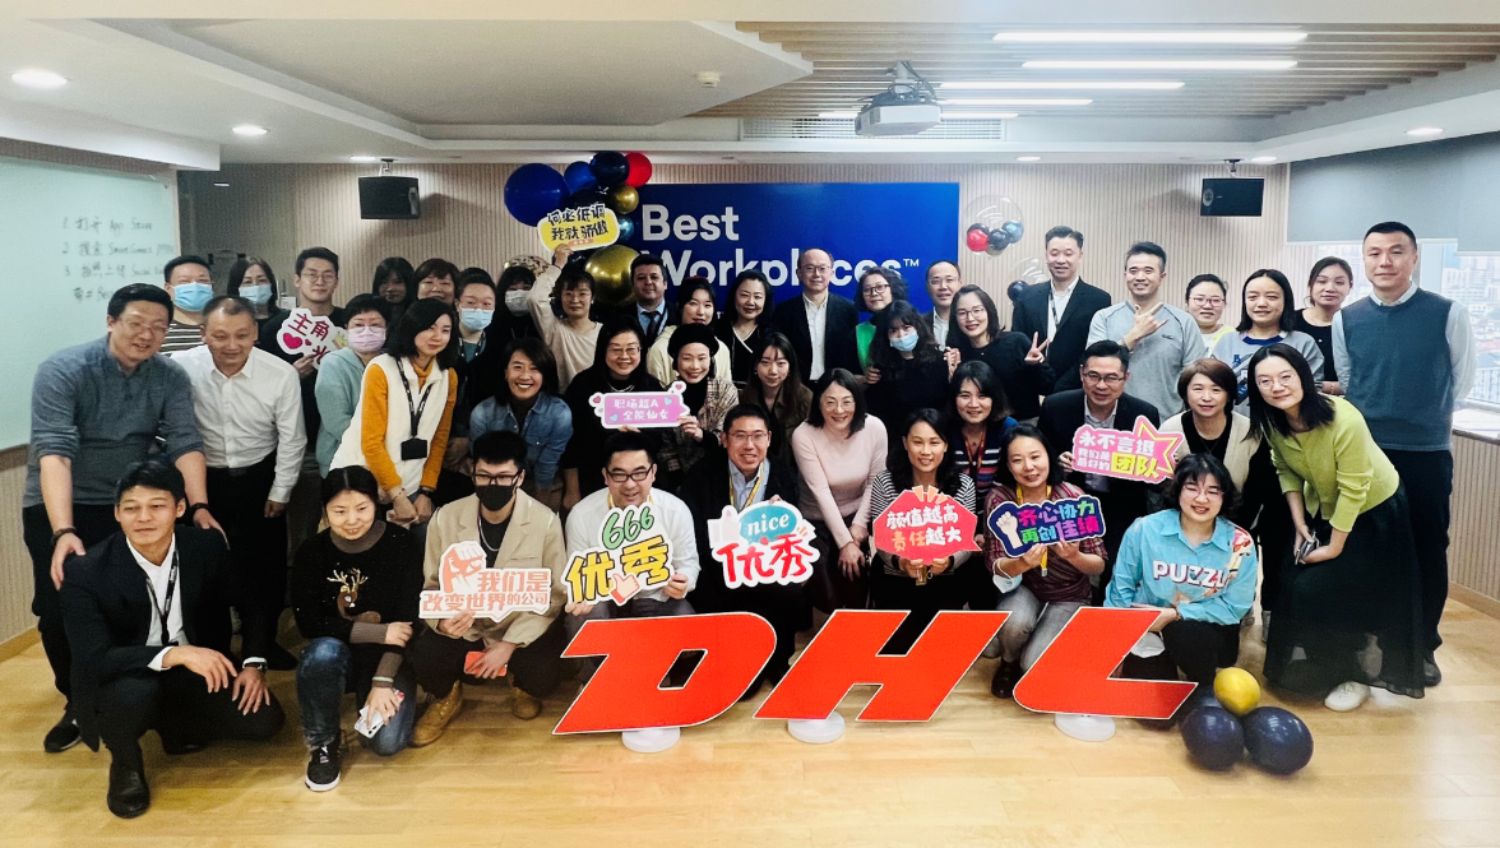 DHL Global Forwarding named among best workplace in Asia